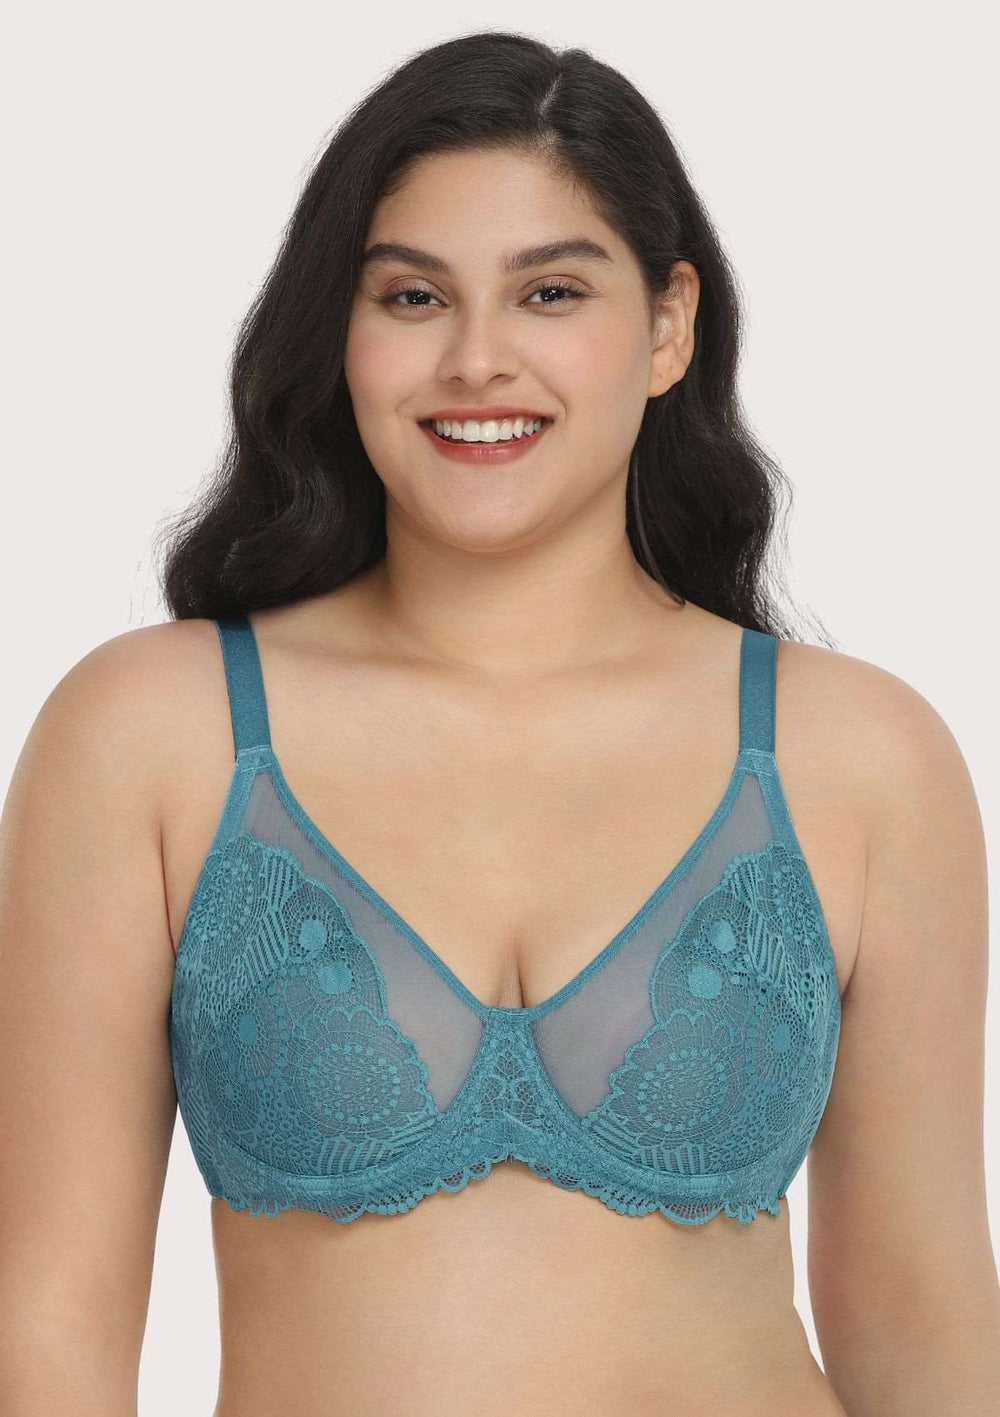  Womens Plus Size Full Coverage Underwire Unlined Minimizer  Lace Bra Cloud Begonia 40D